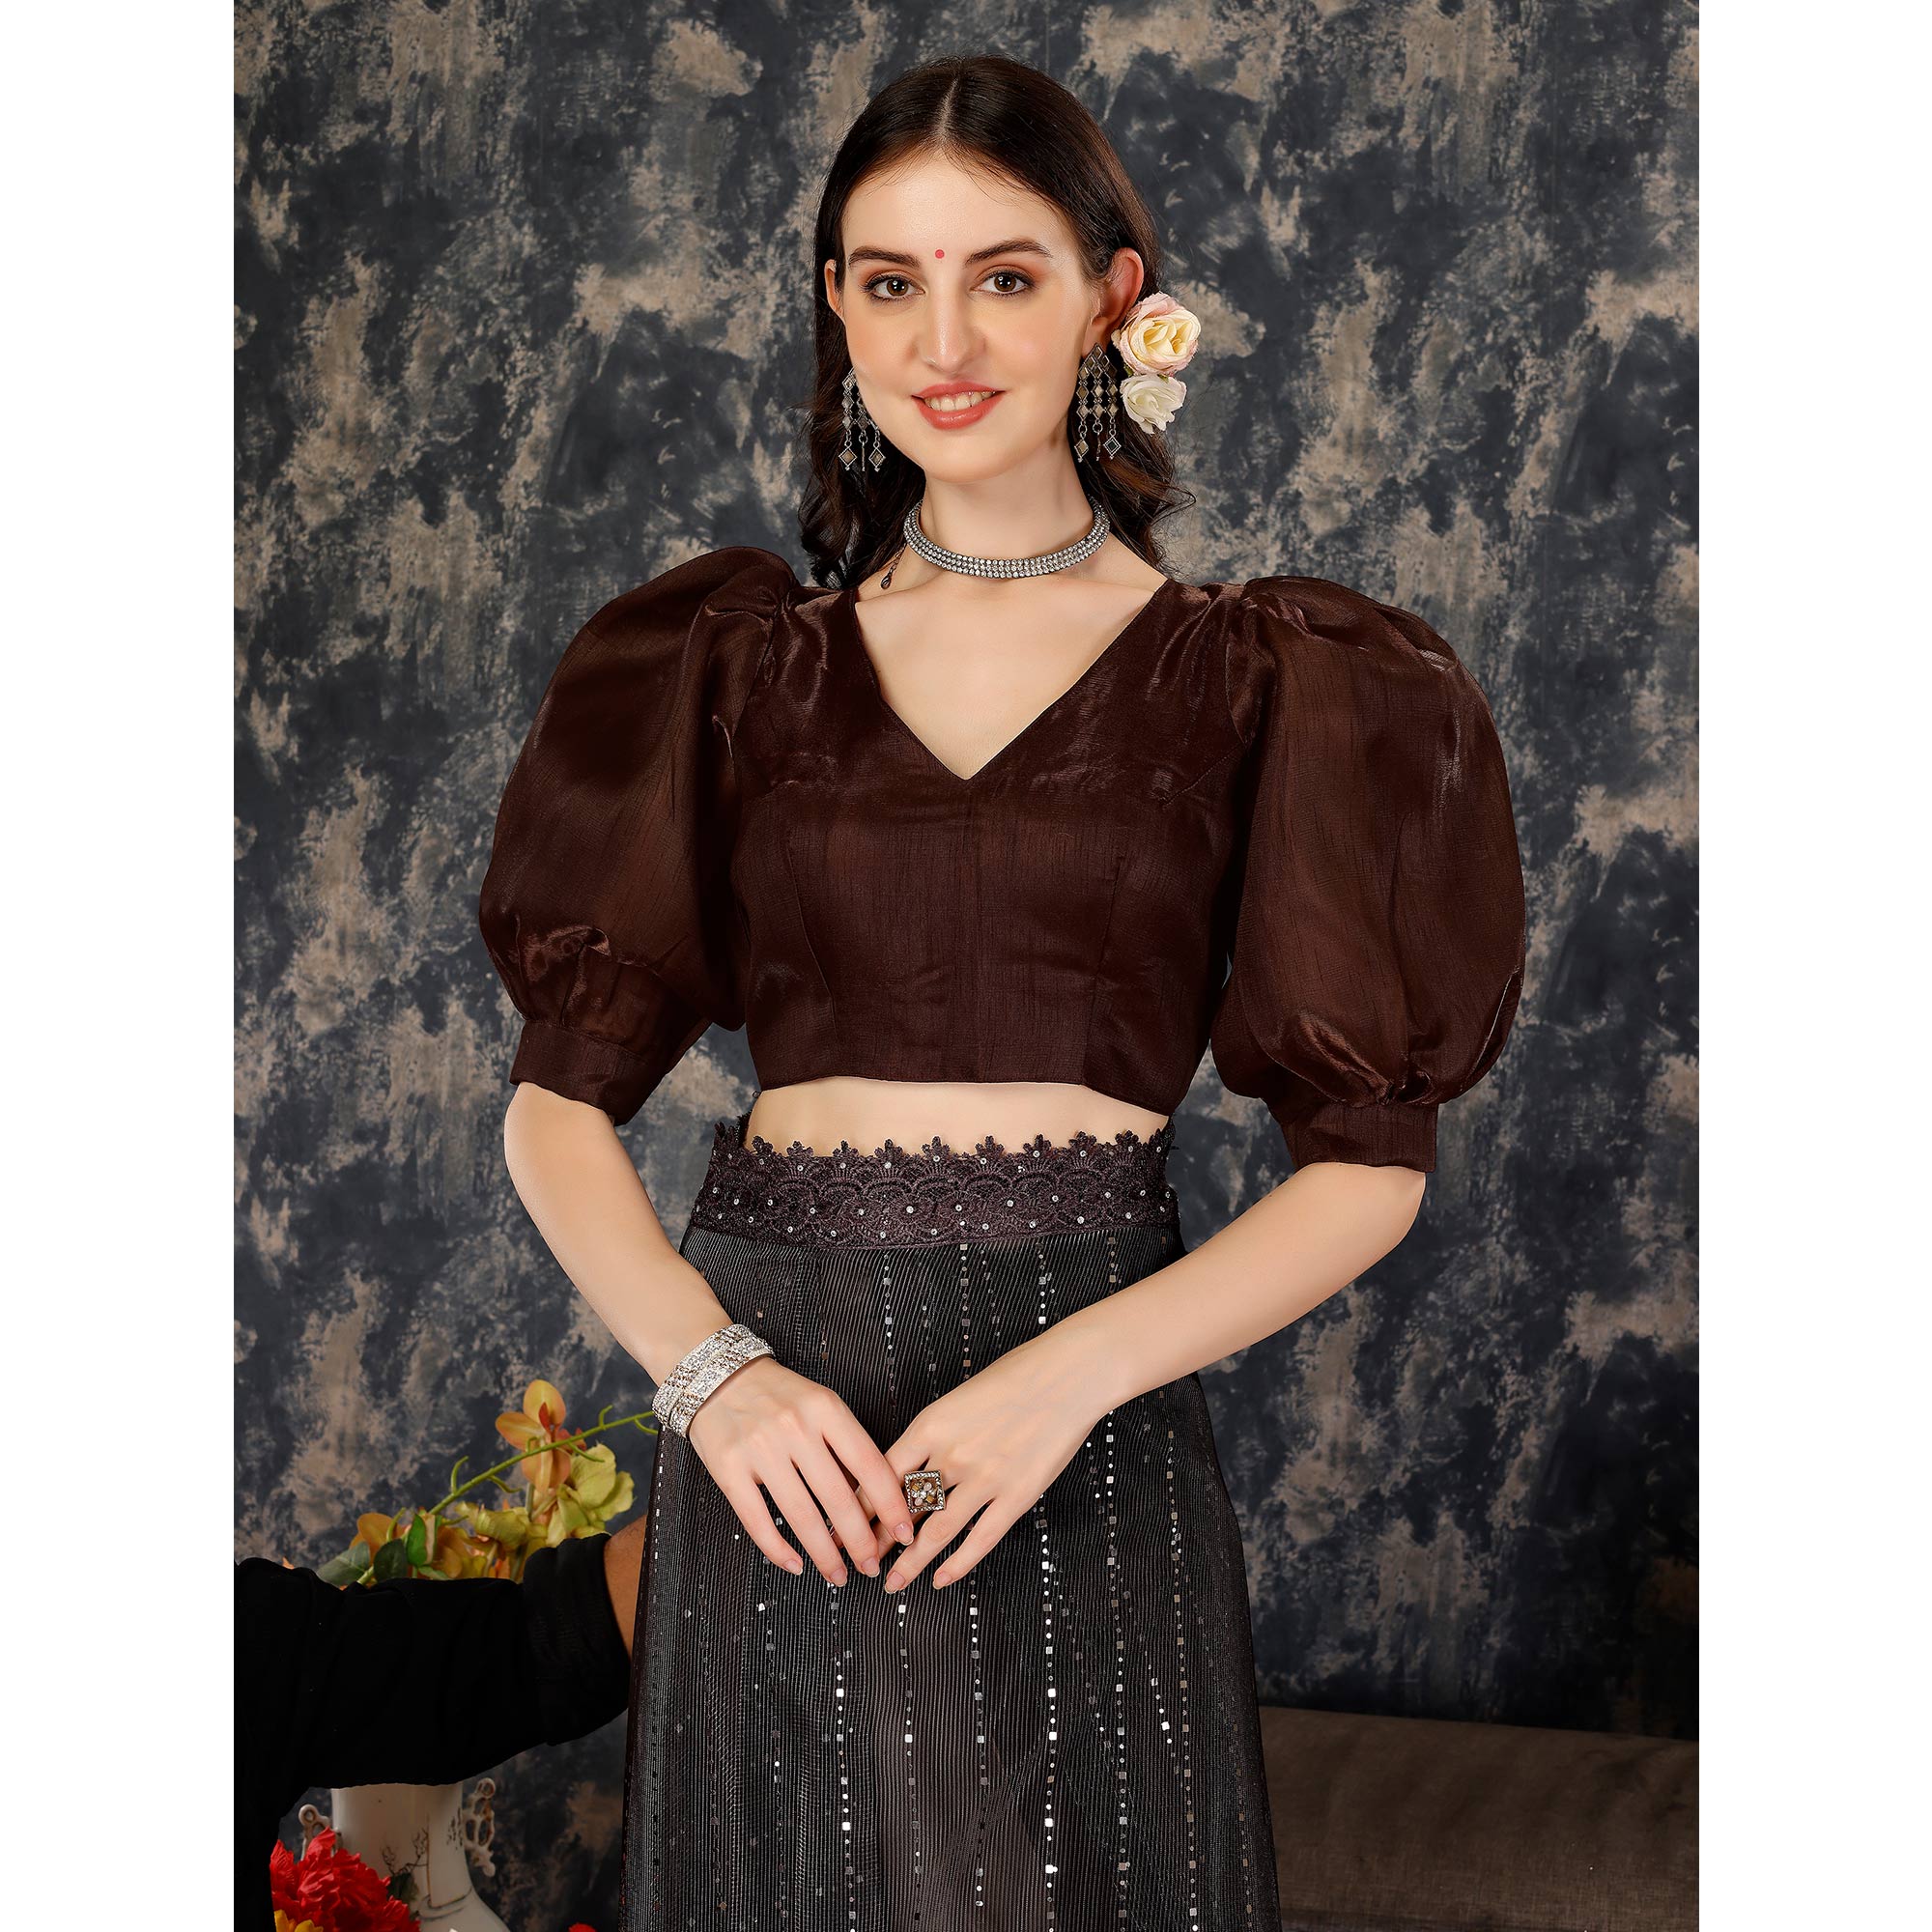 Brown Tikali Work Lycra Saree With Embroidered Lace Border